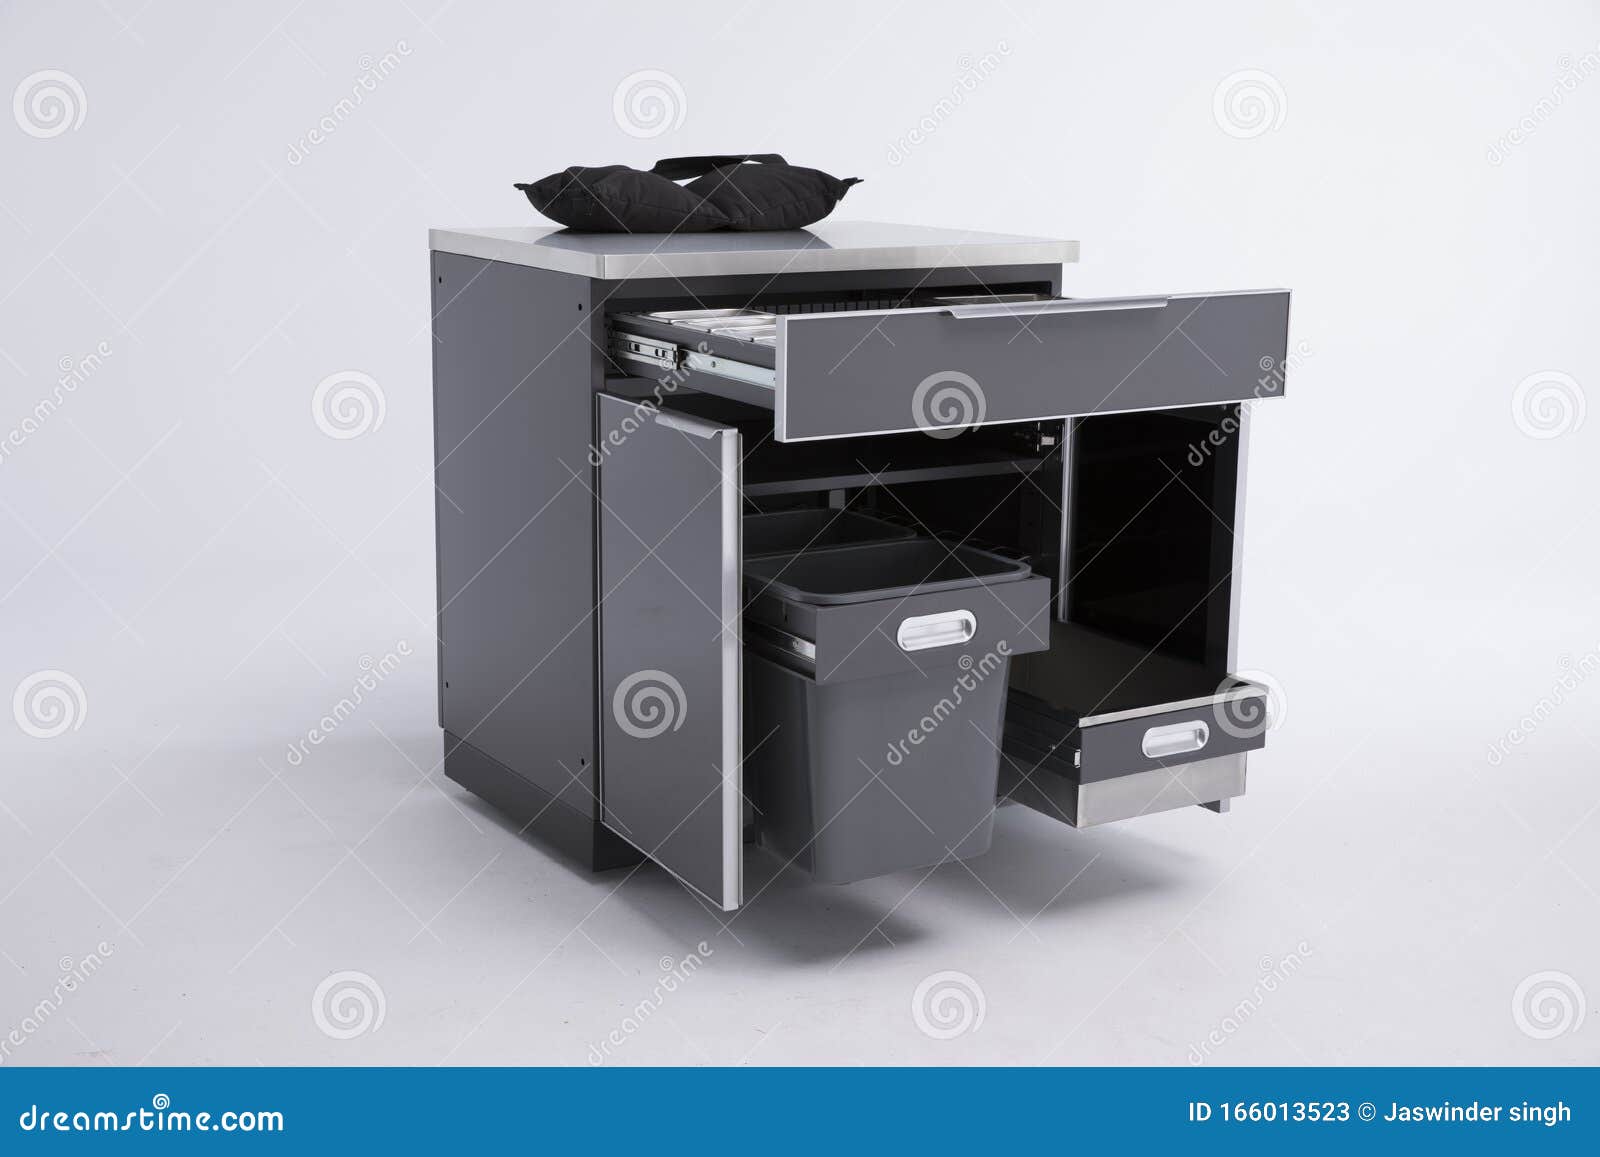 The Home Depot Canada 4 Piece Aluminum Outdoor Kitchen In Slate